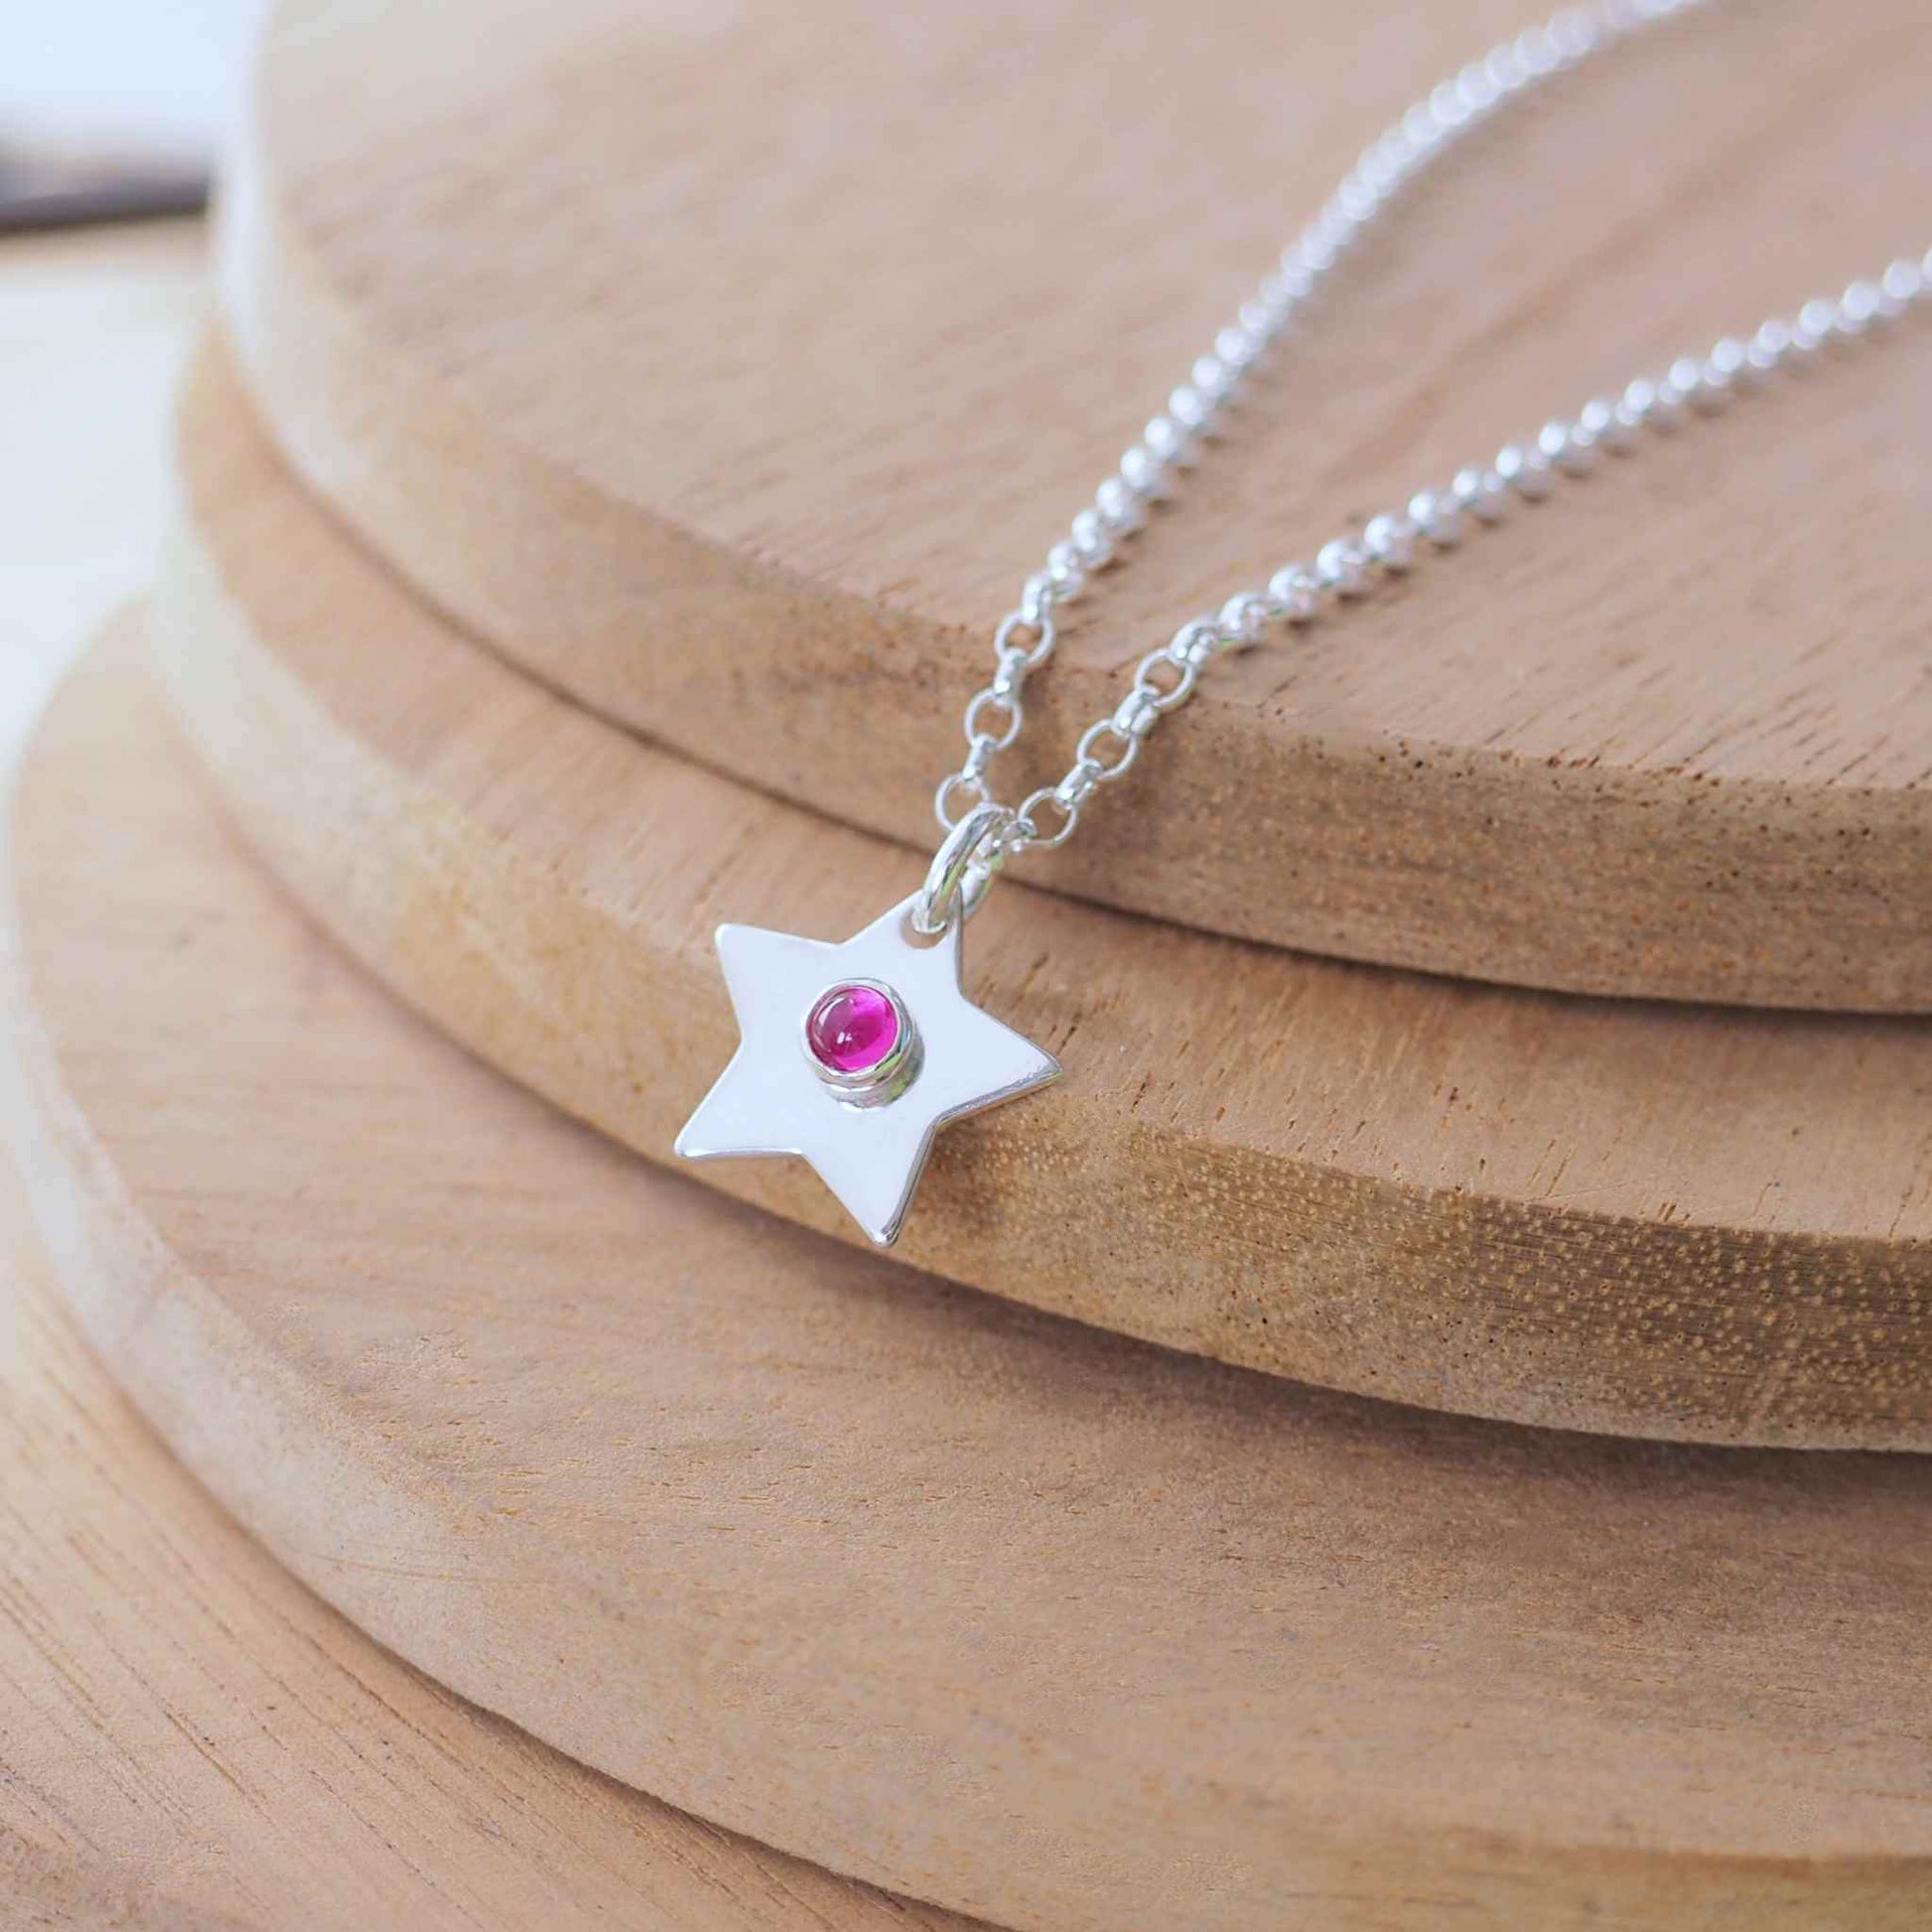 July Birthstone Charm Necklace in the shape of a star with a round 3mm lab ruby cabochon centre. The star measures 12mm in size so is small enough for children as well as adults and is available in a range of other birthstones too. It is Sterling Silver and comes with a choice of chain design and length. Handmade in Scotland by Maram Jewellery